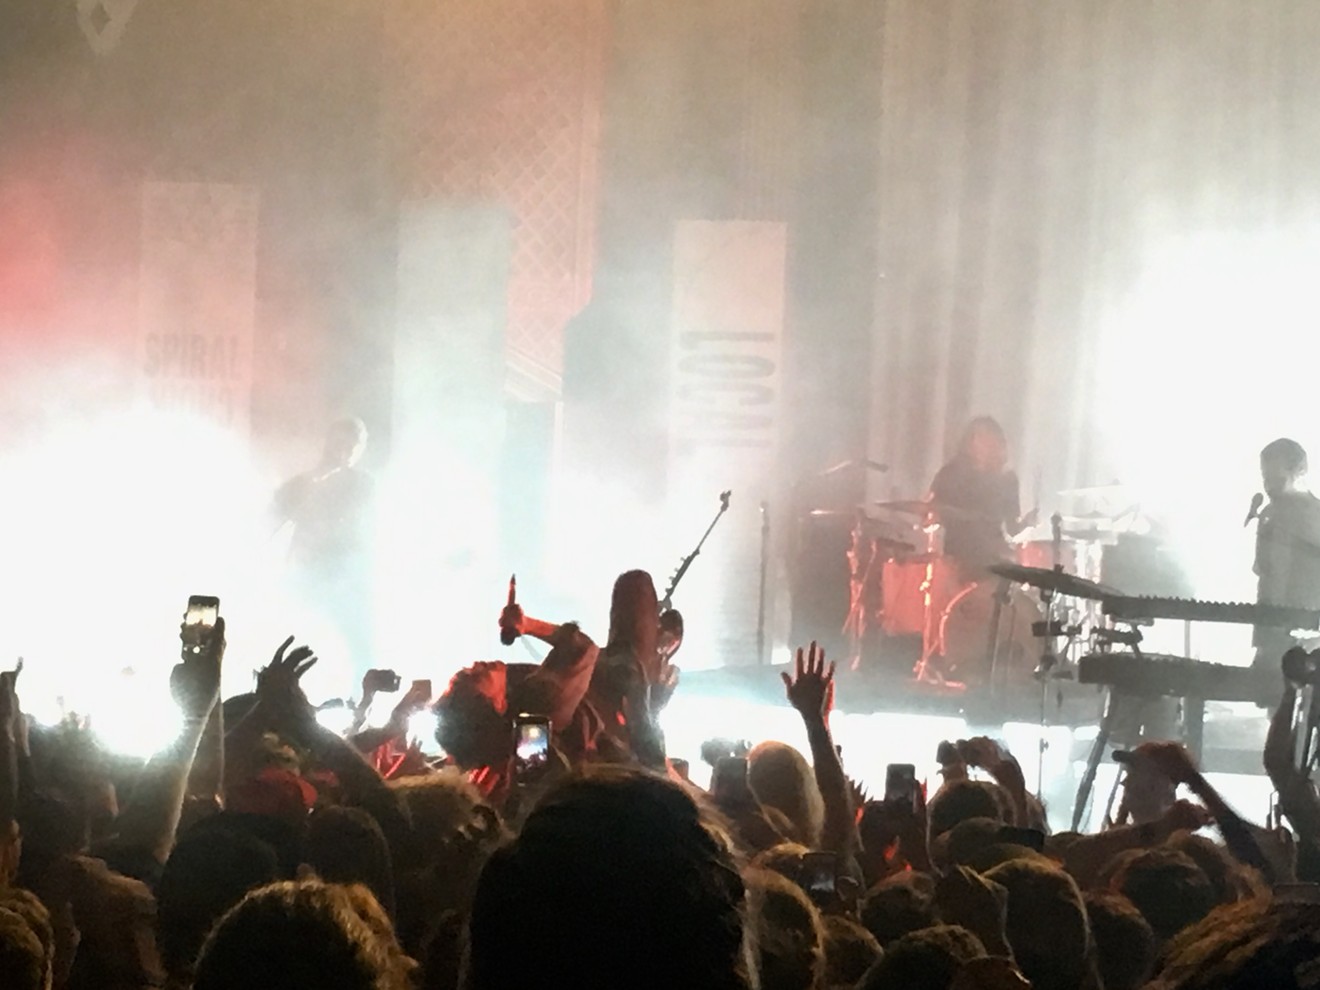 Local Natives singer Taylor Rice crowdsurfing during the song "Sun Hands."